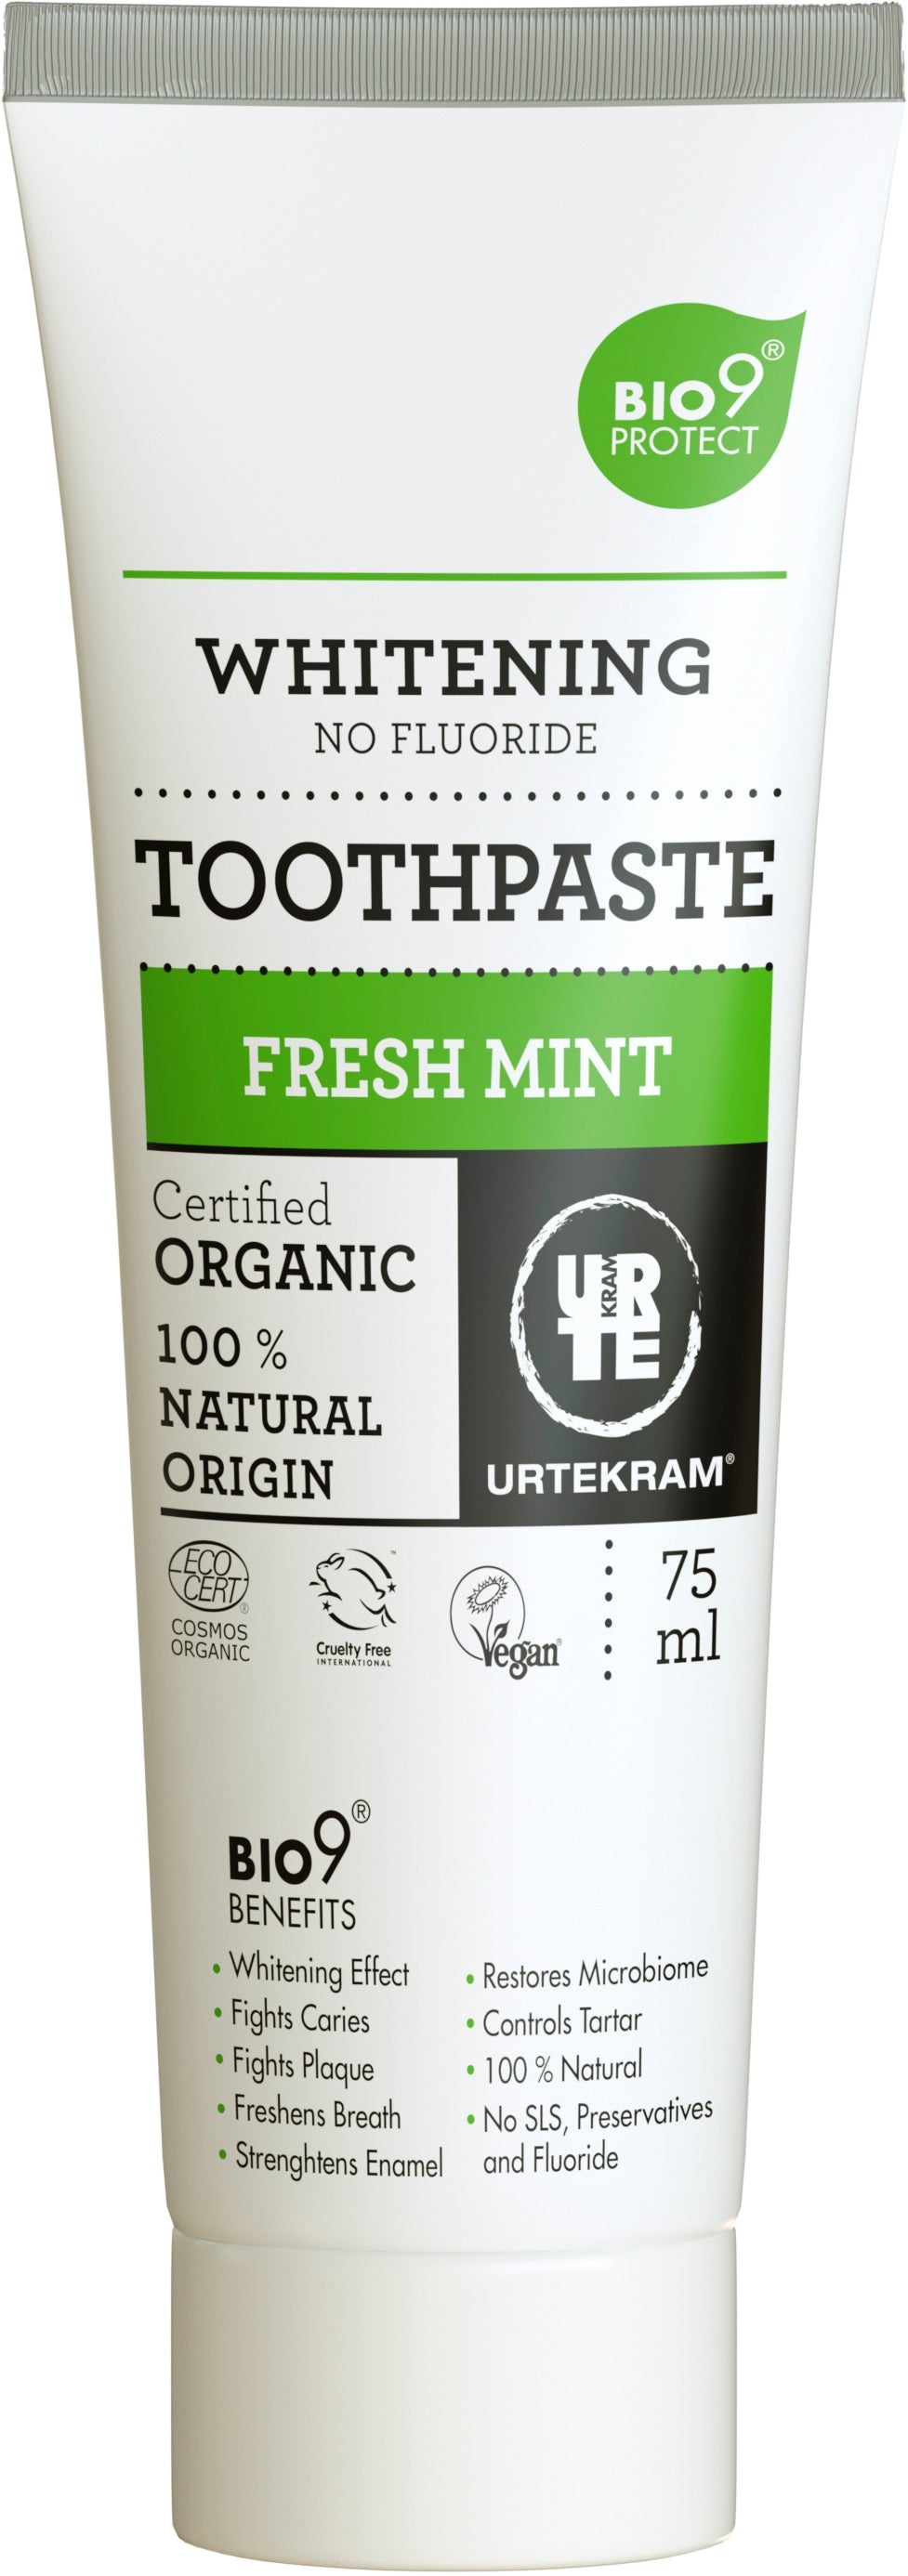 Toothpaste Fresh Mint Whitening (Org 44155A